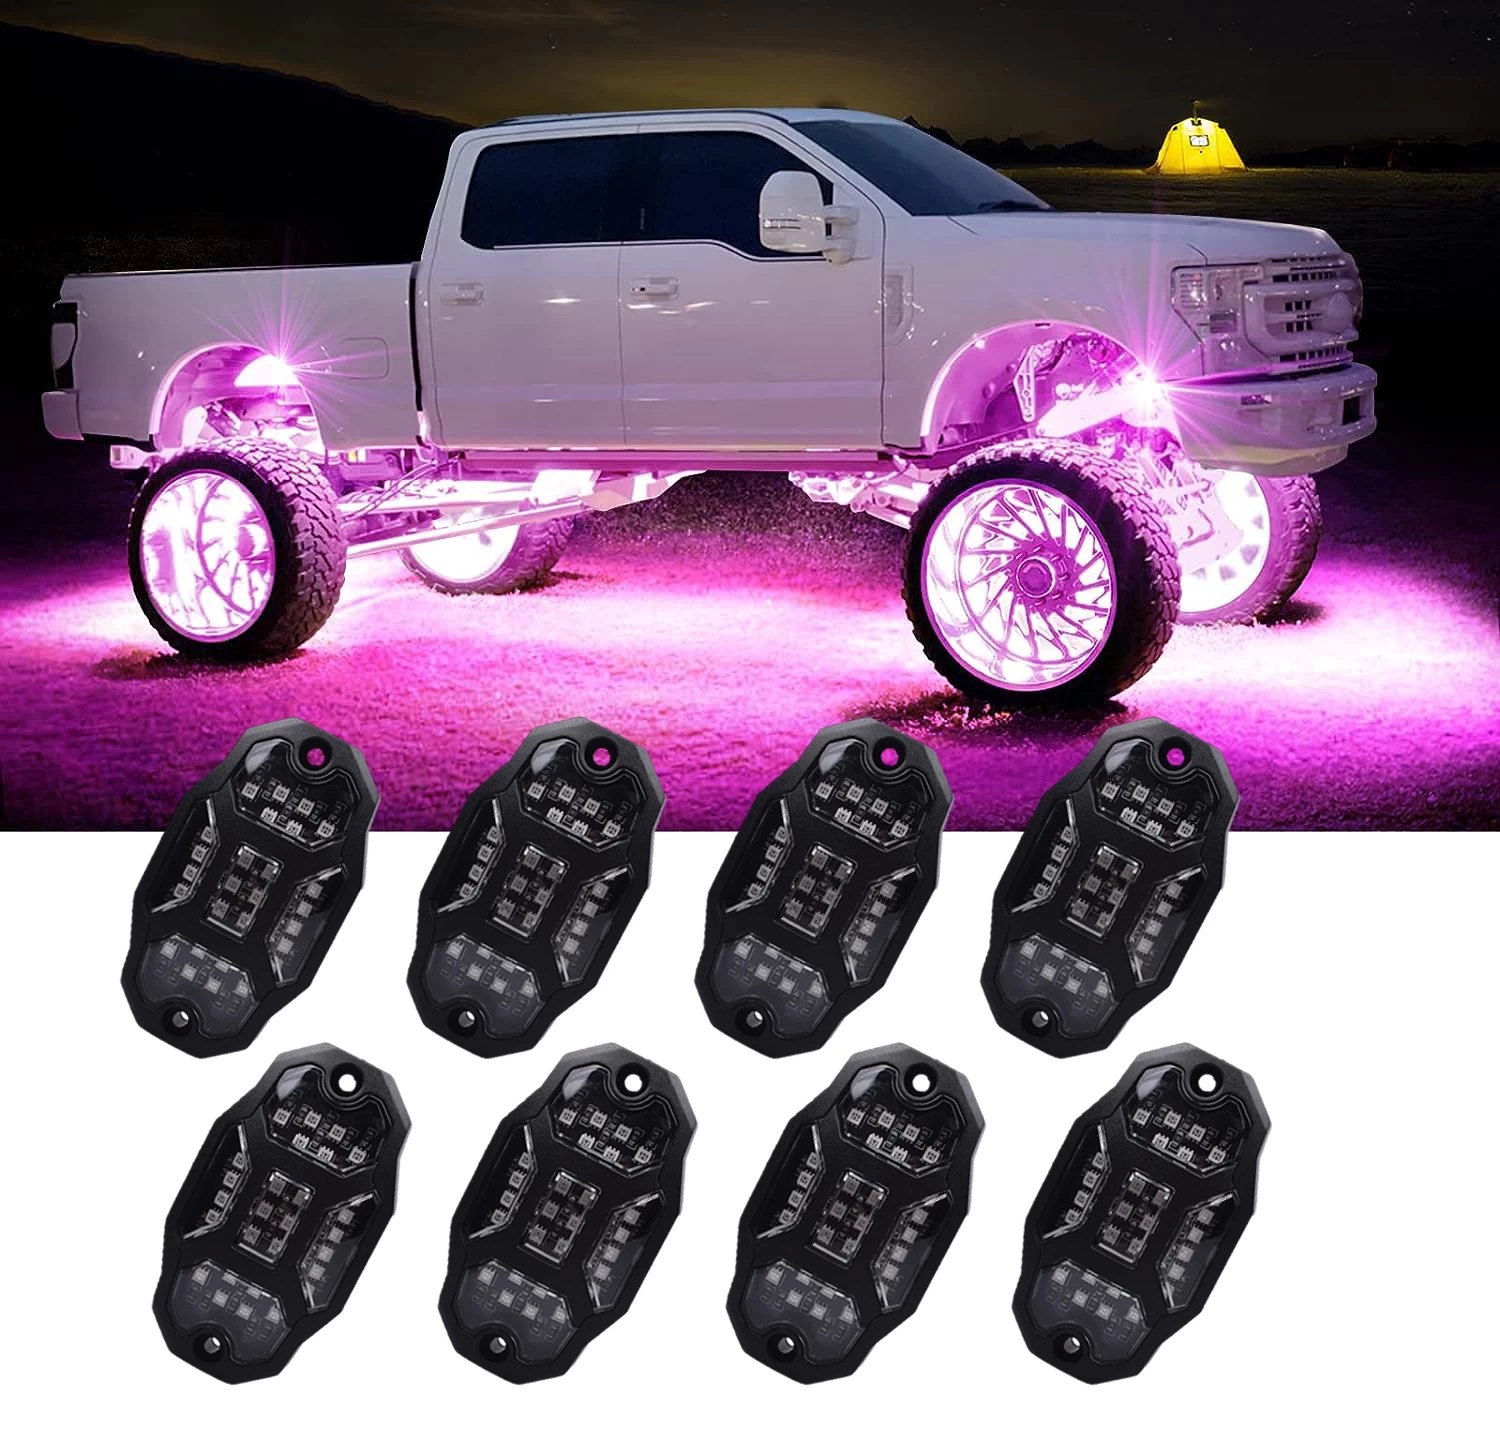 China Undergolw Light For Car Jeep Off-Road Truck Boat Bluetooth APP Control 4/6/8 In 1 RGB LED Rock Lights Chassis Light Music Sync - COPY - bav4w2 Hersteller